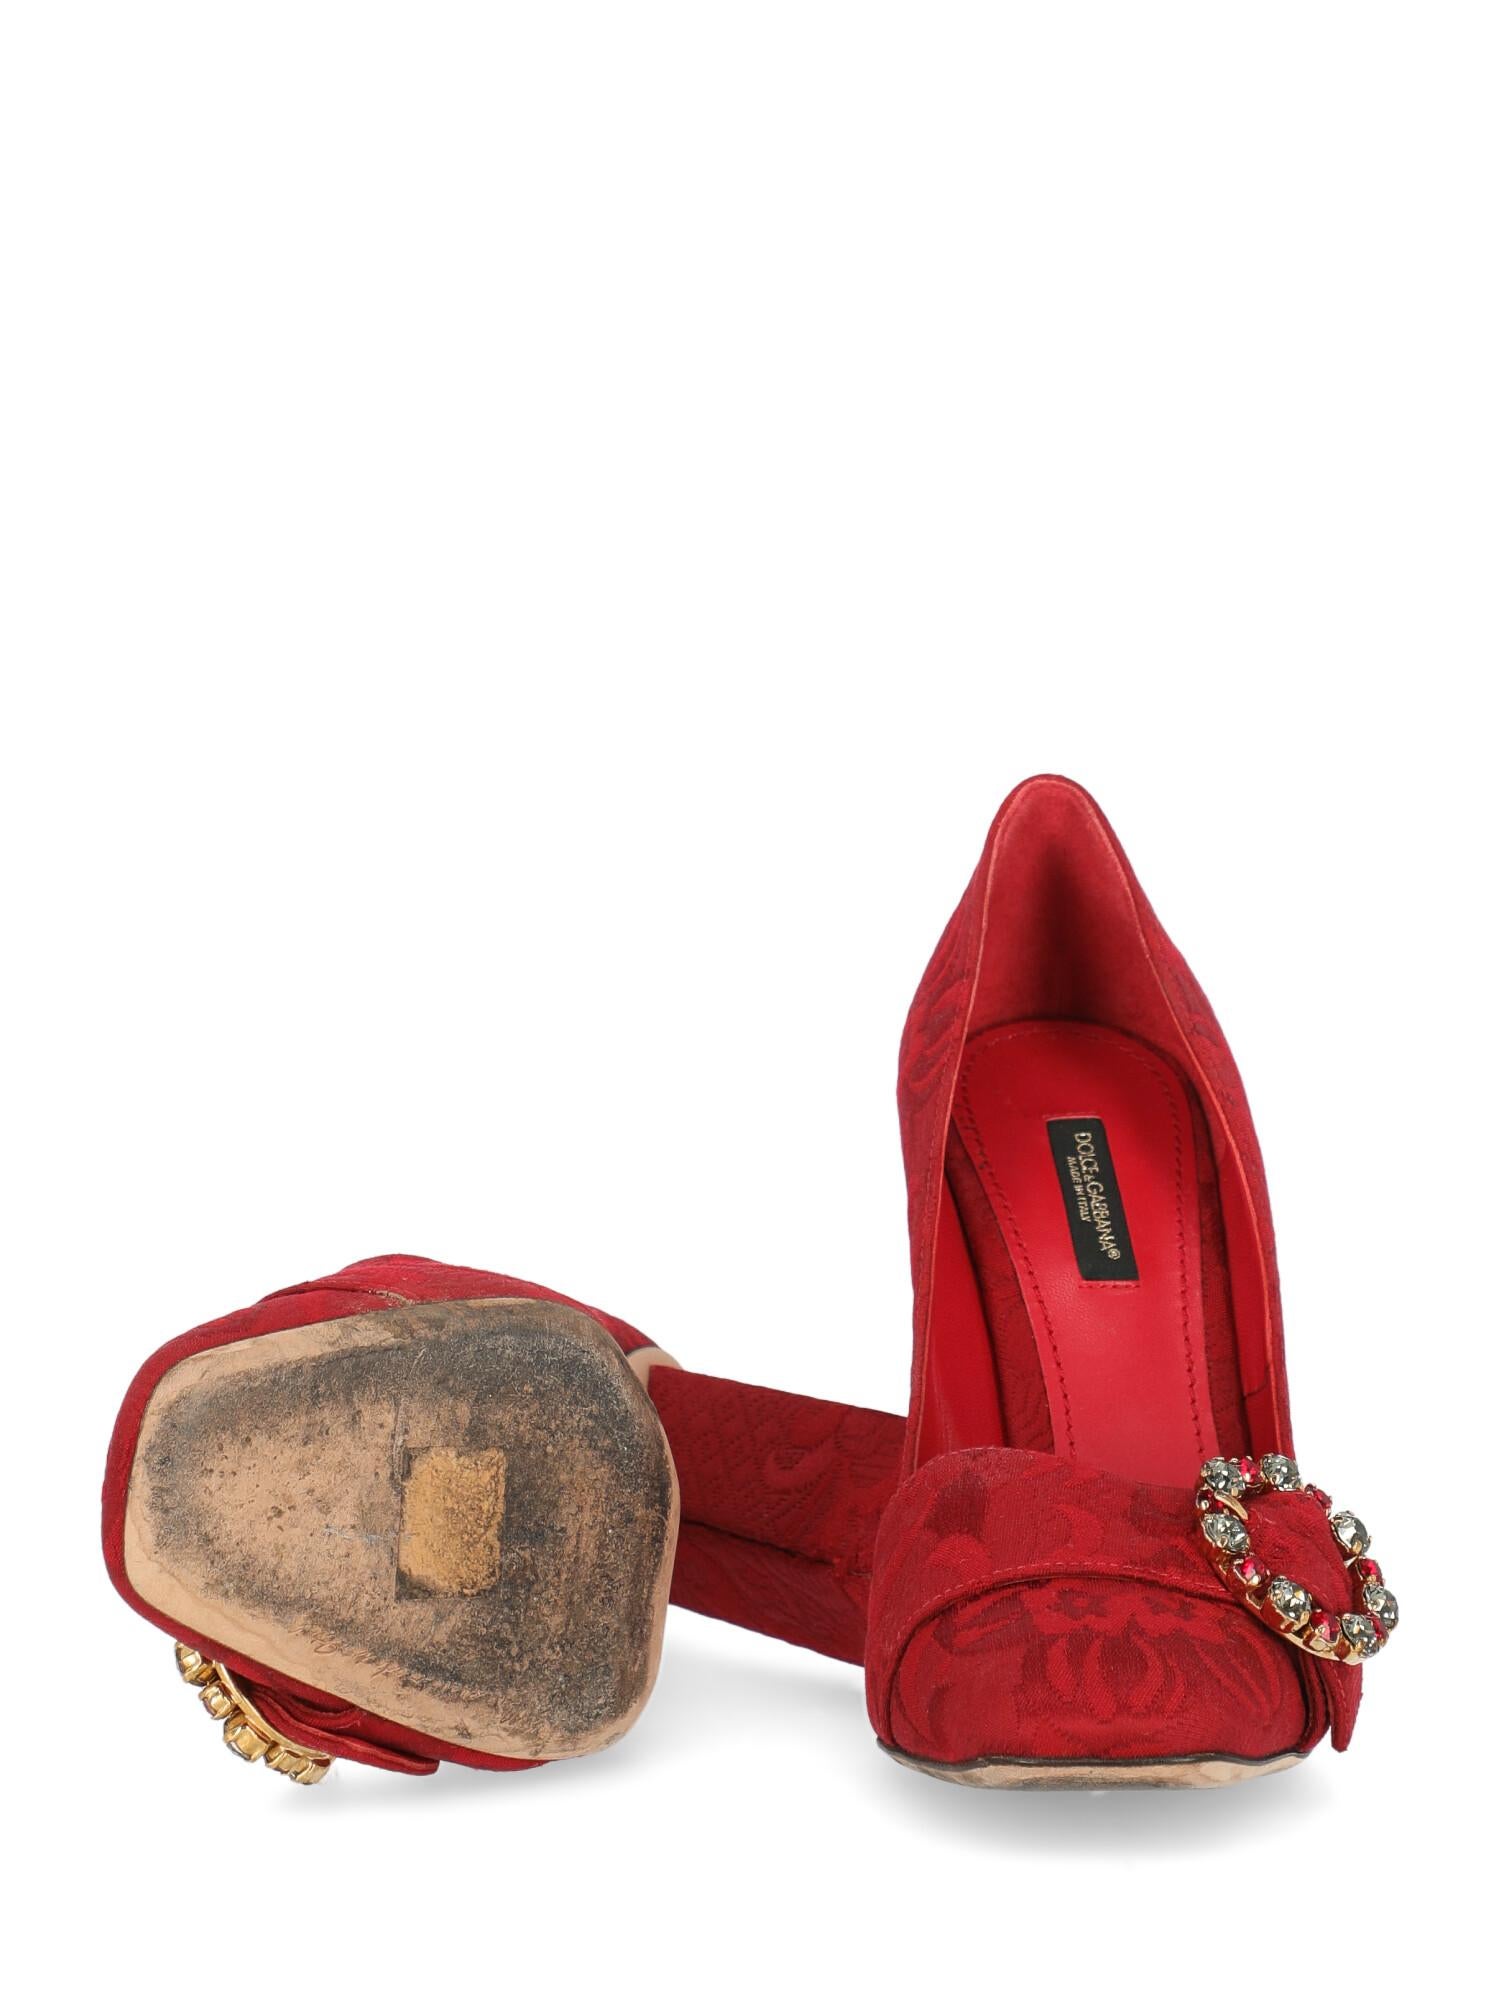 Dolce & Gabbana Woman Pumps Red Fabric IT 39 For Sale 1